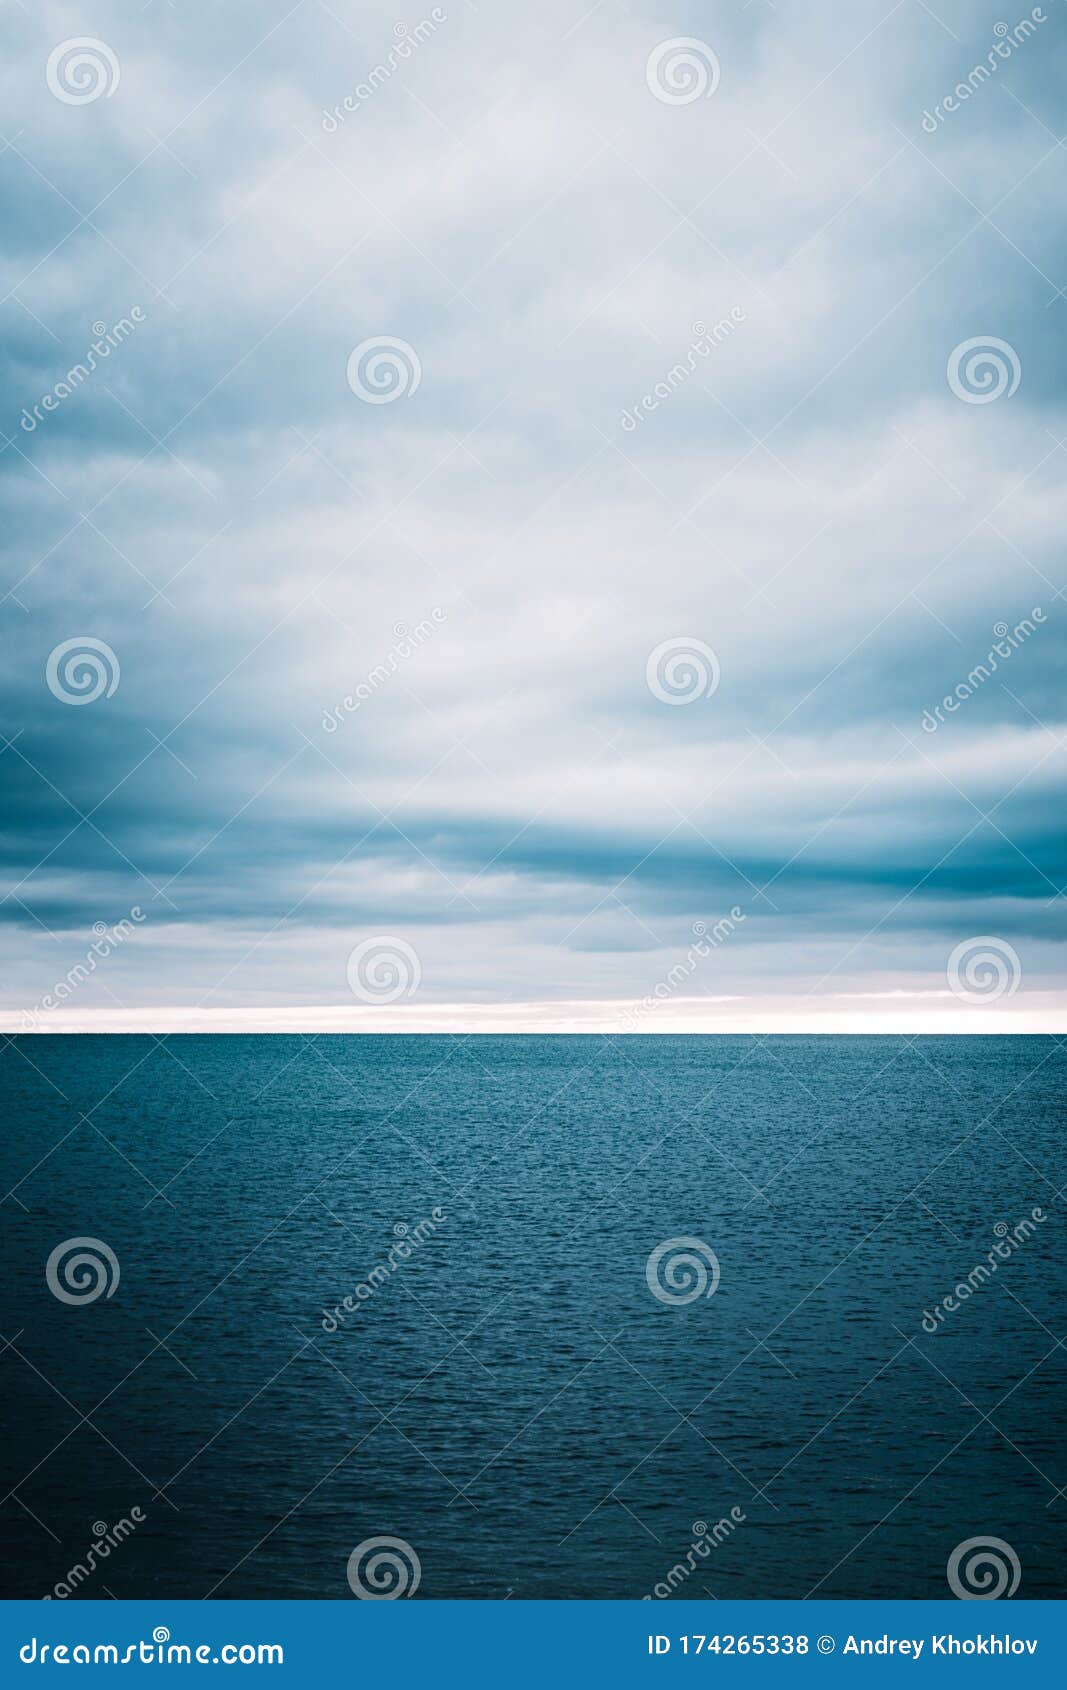 water waves on cloudy sky background